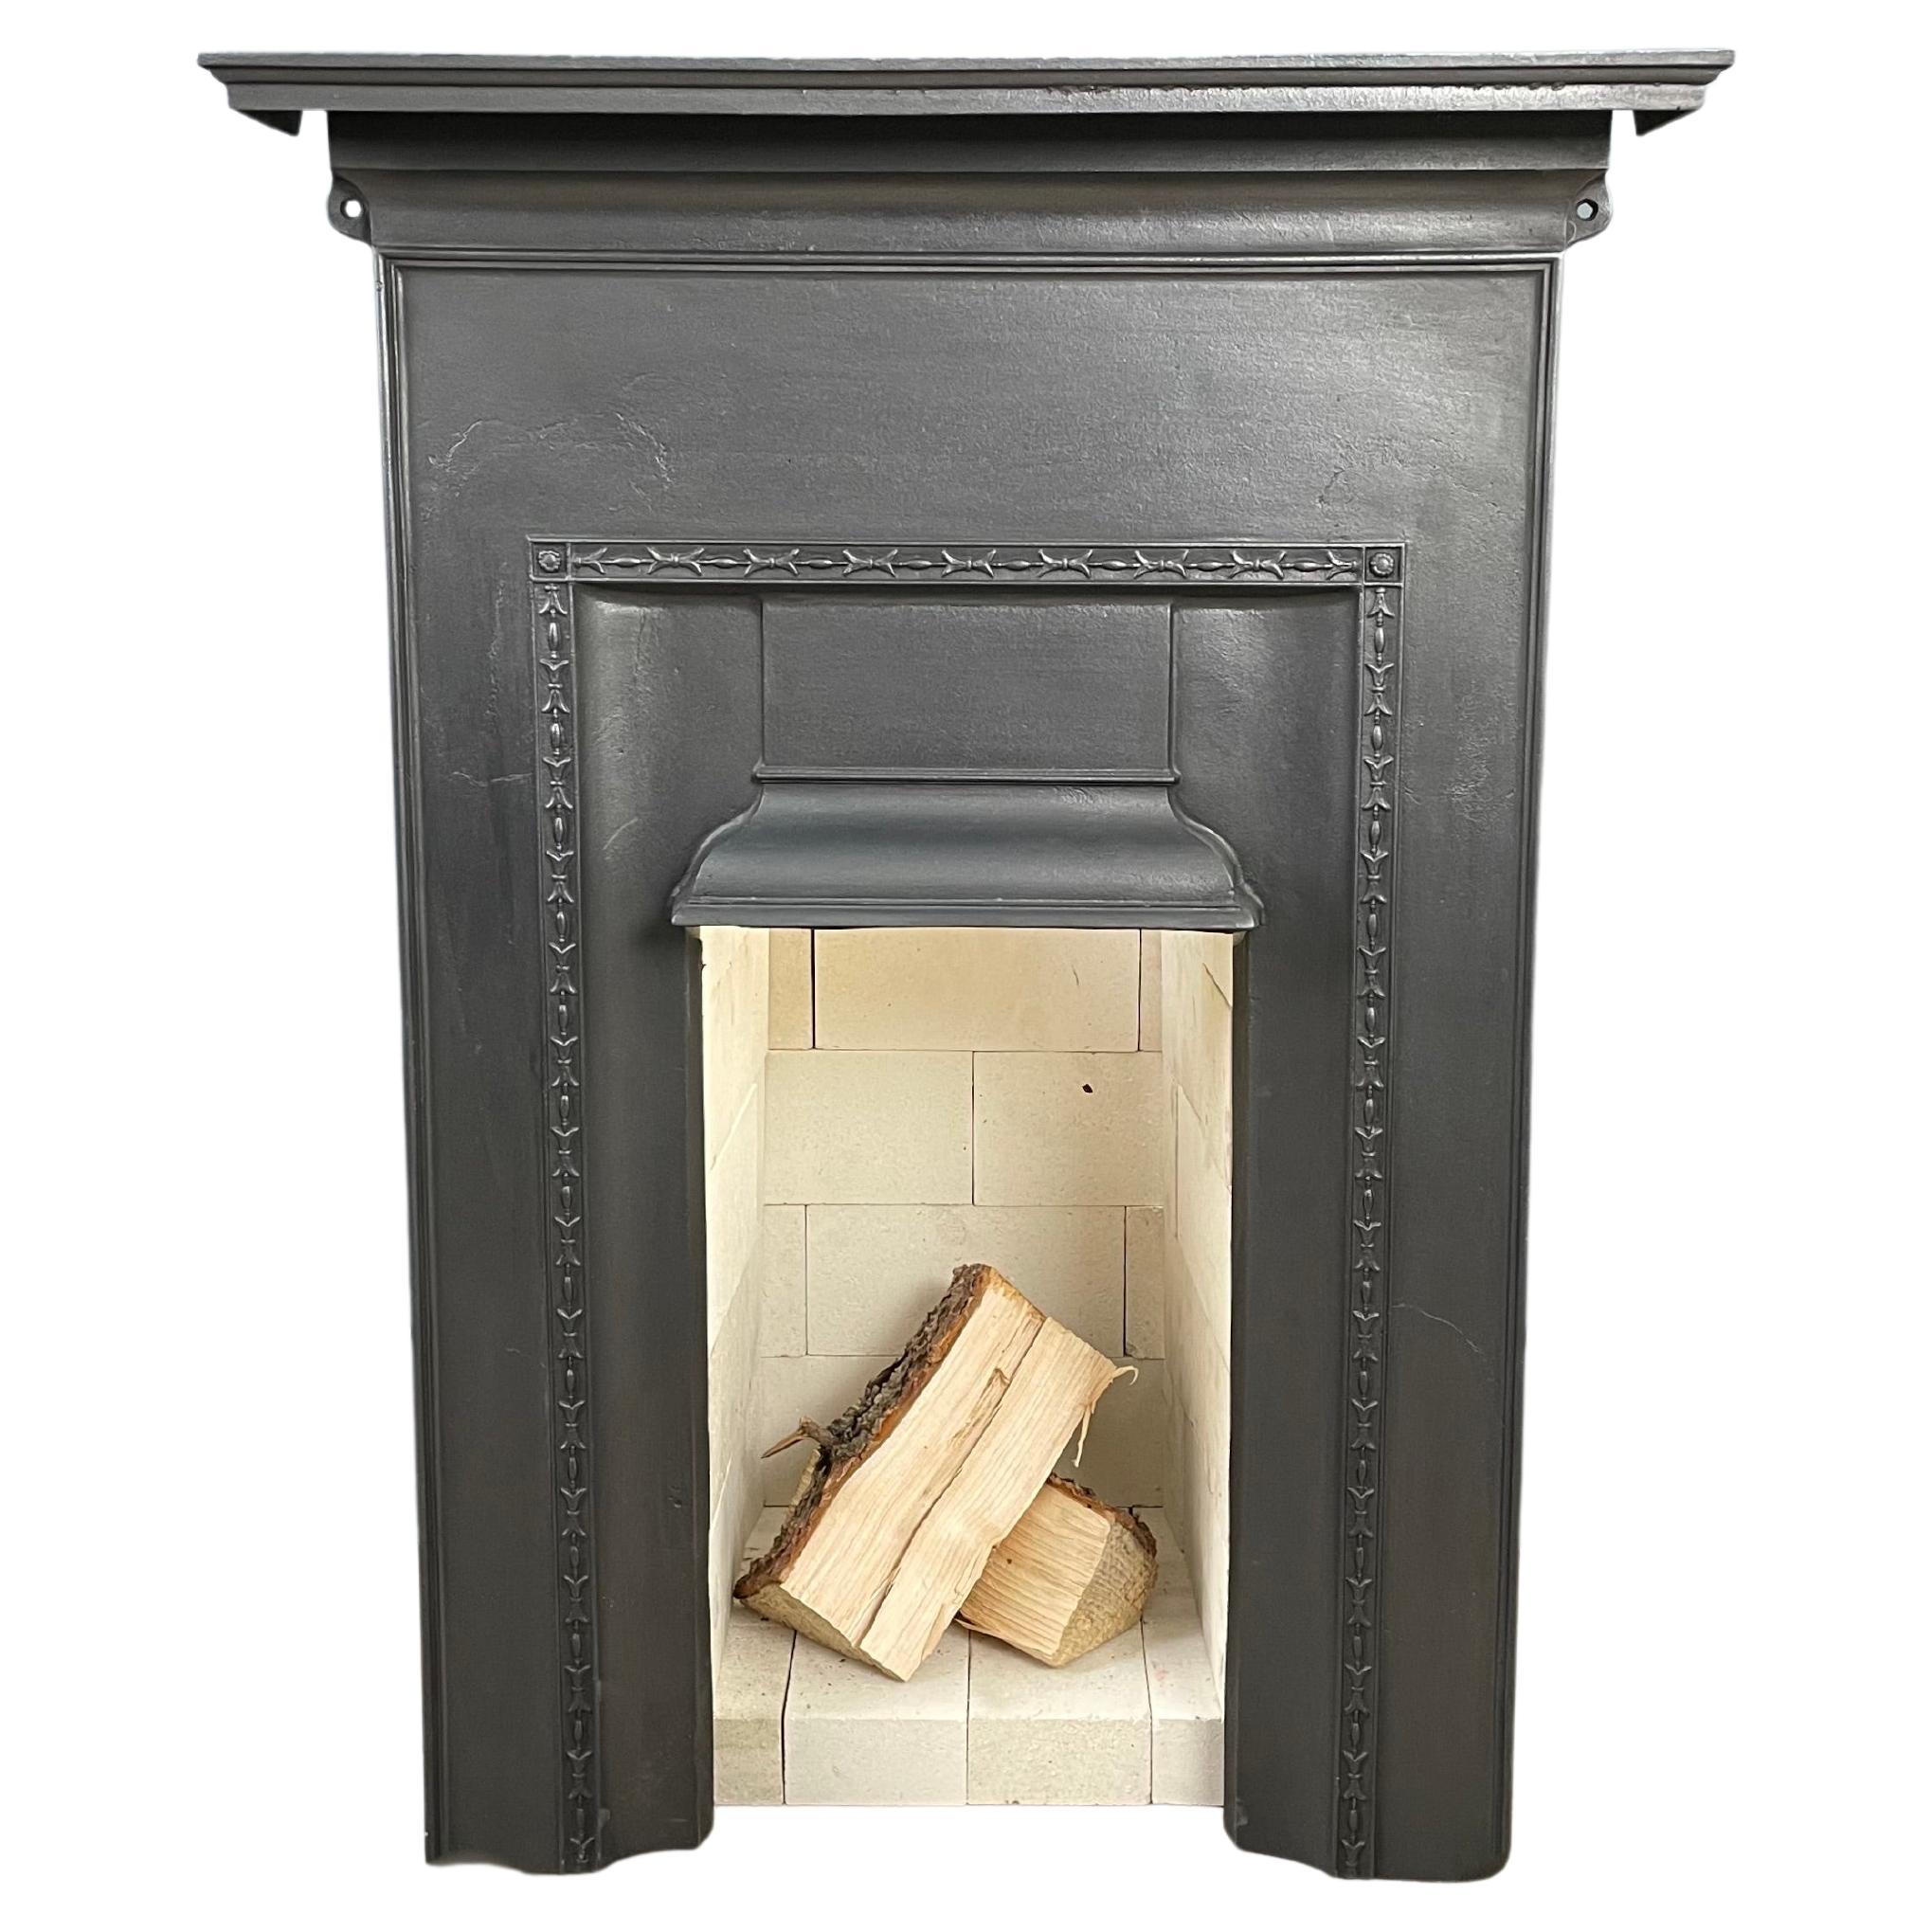 Why is cast iron used for fireplaces?